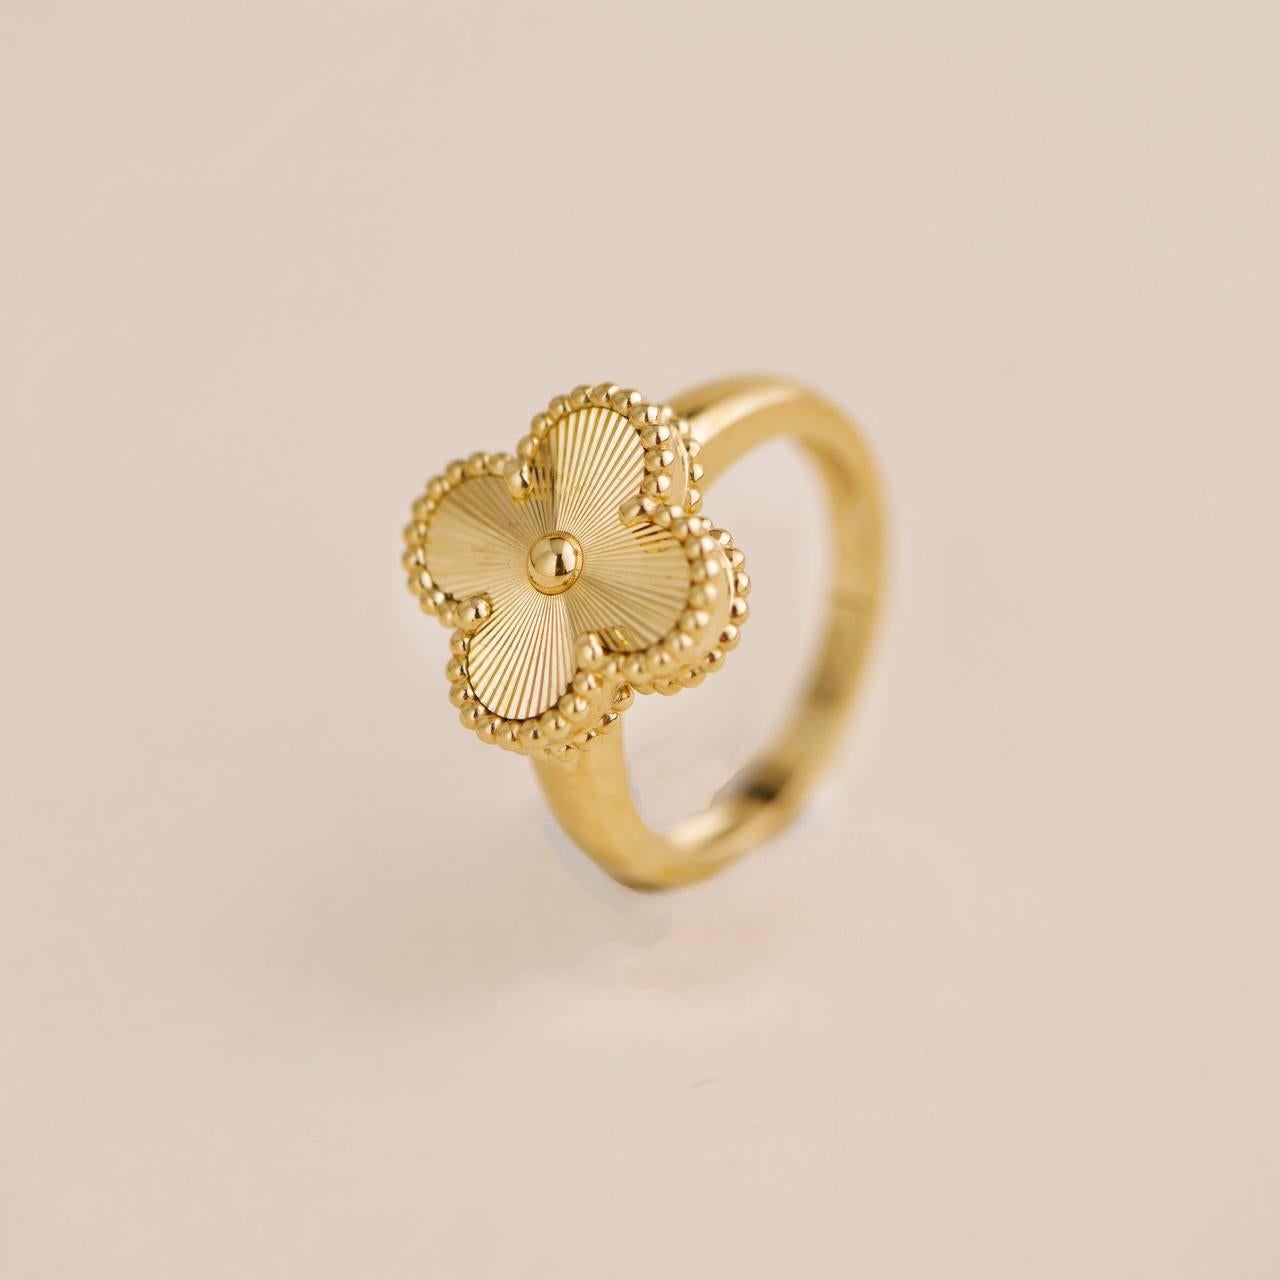 Van Cleef & Arpels Guilloché Alhambra 18k Yellow Gold Ring Size 54 In Excellent Condition For Sale In Banbury, GB